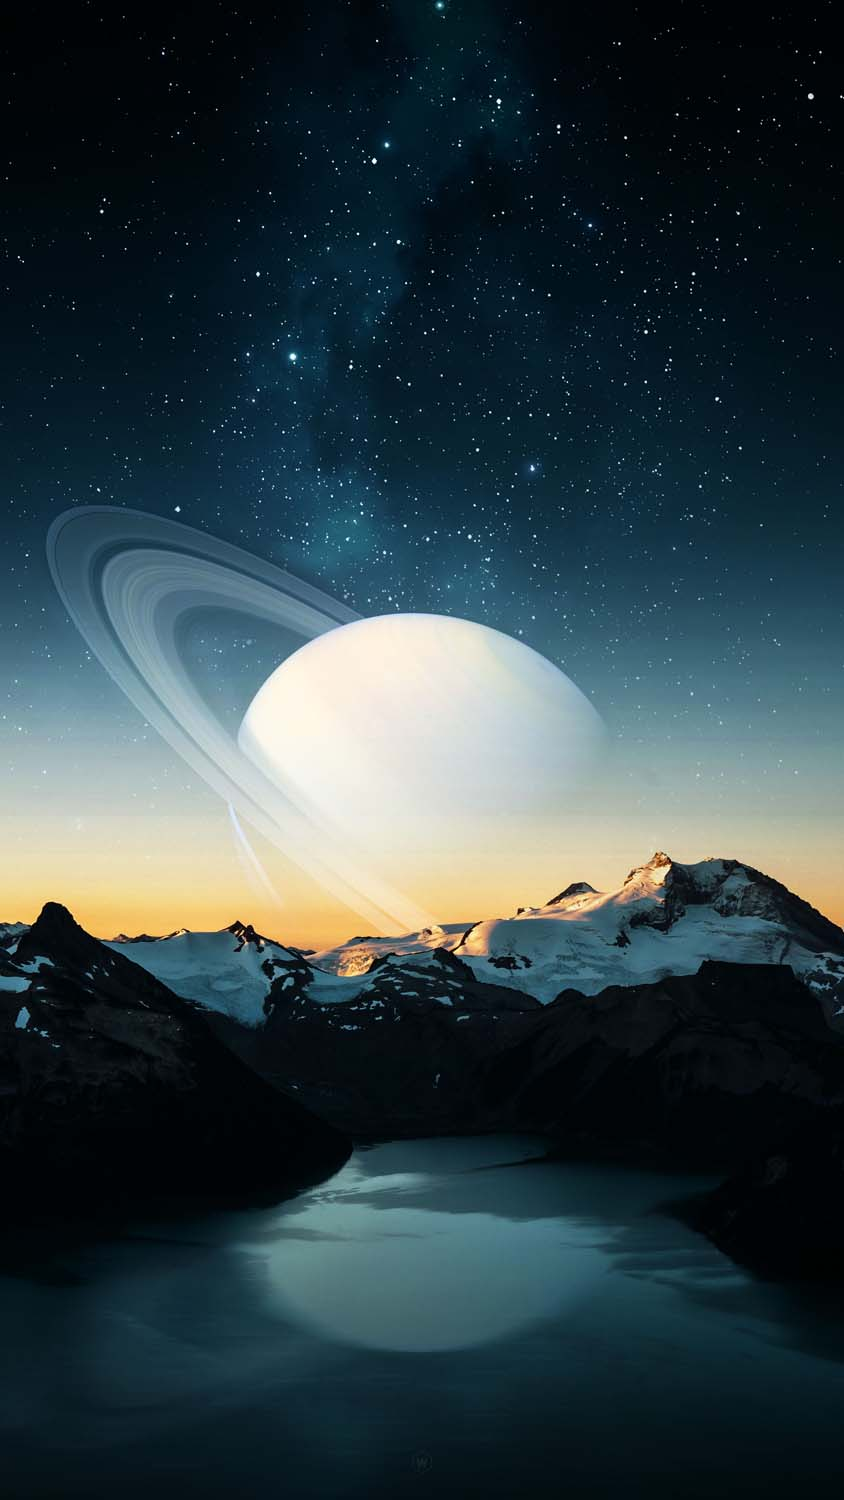 Saturn View From Mountains IPhone Wallpaper HD  IPhone Wallpapers